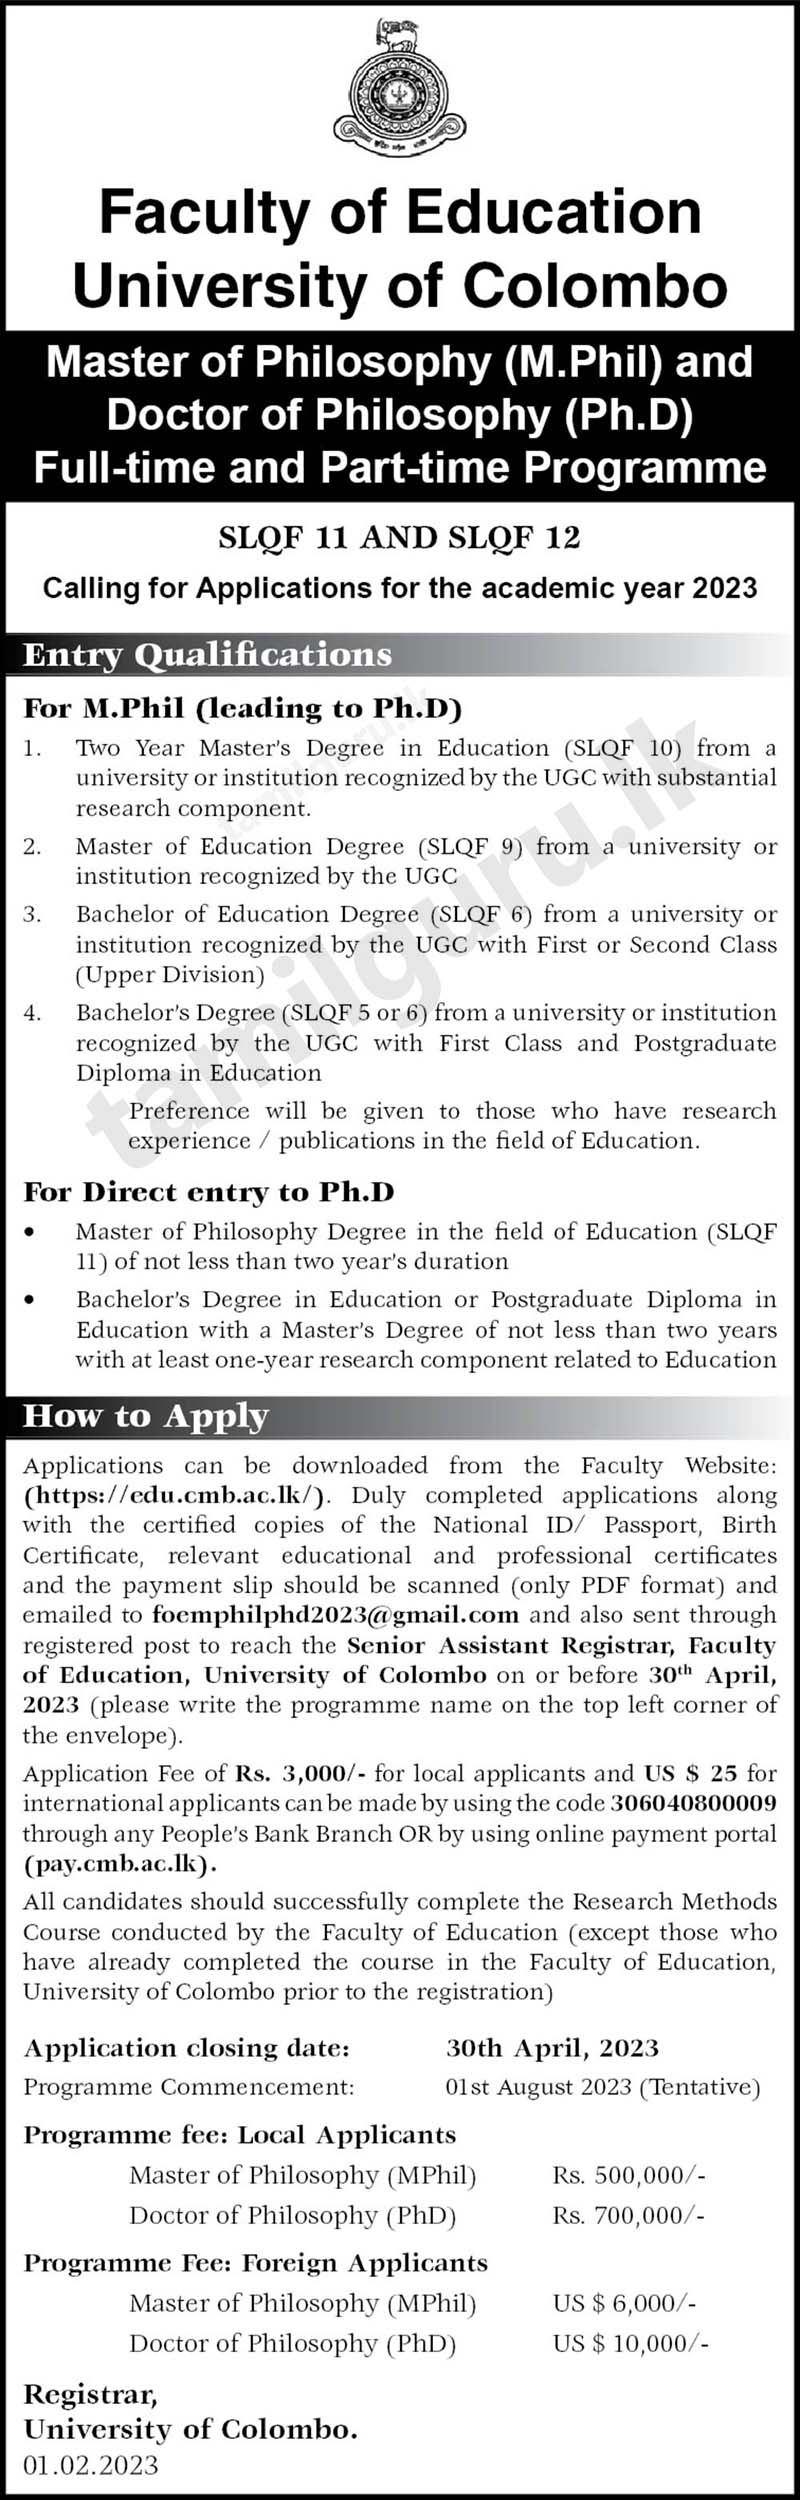 Calling Applications for MPhil & PhD Programmes in Education 2023 - University of Colombo